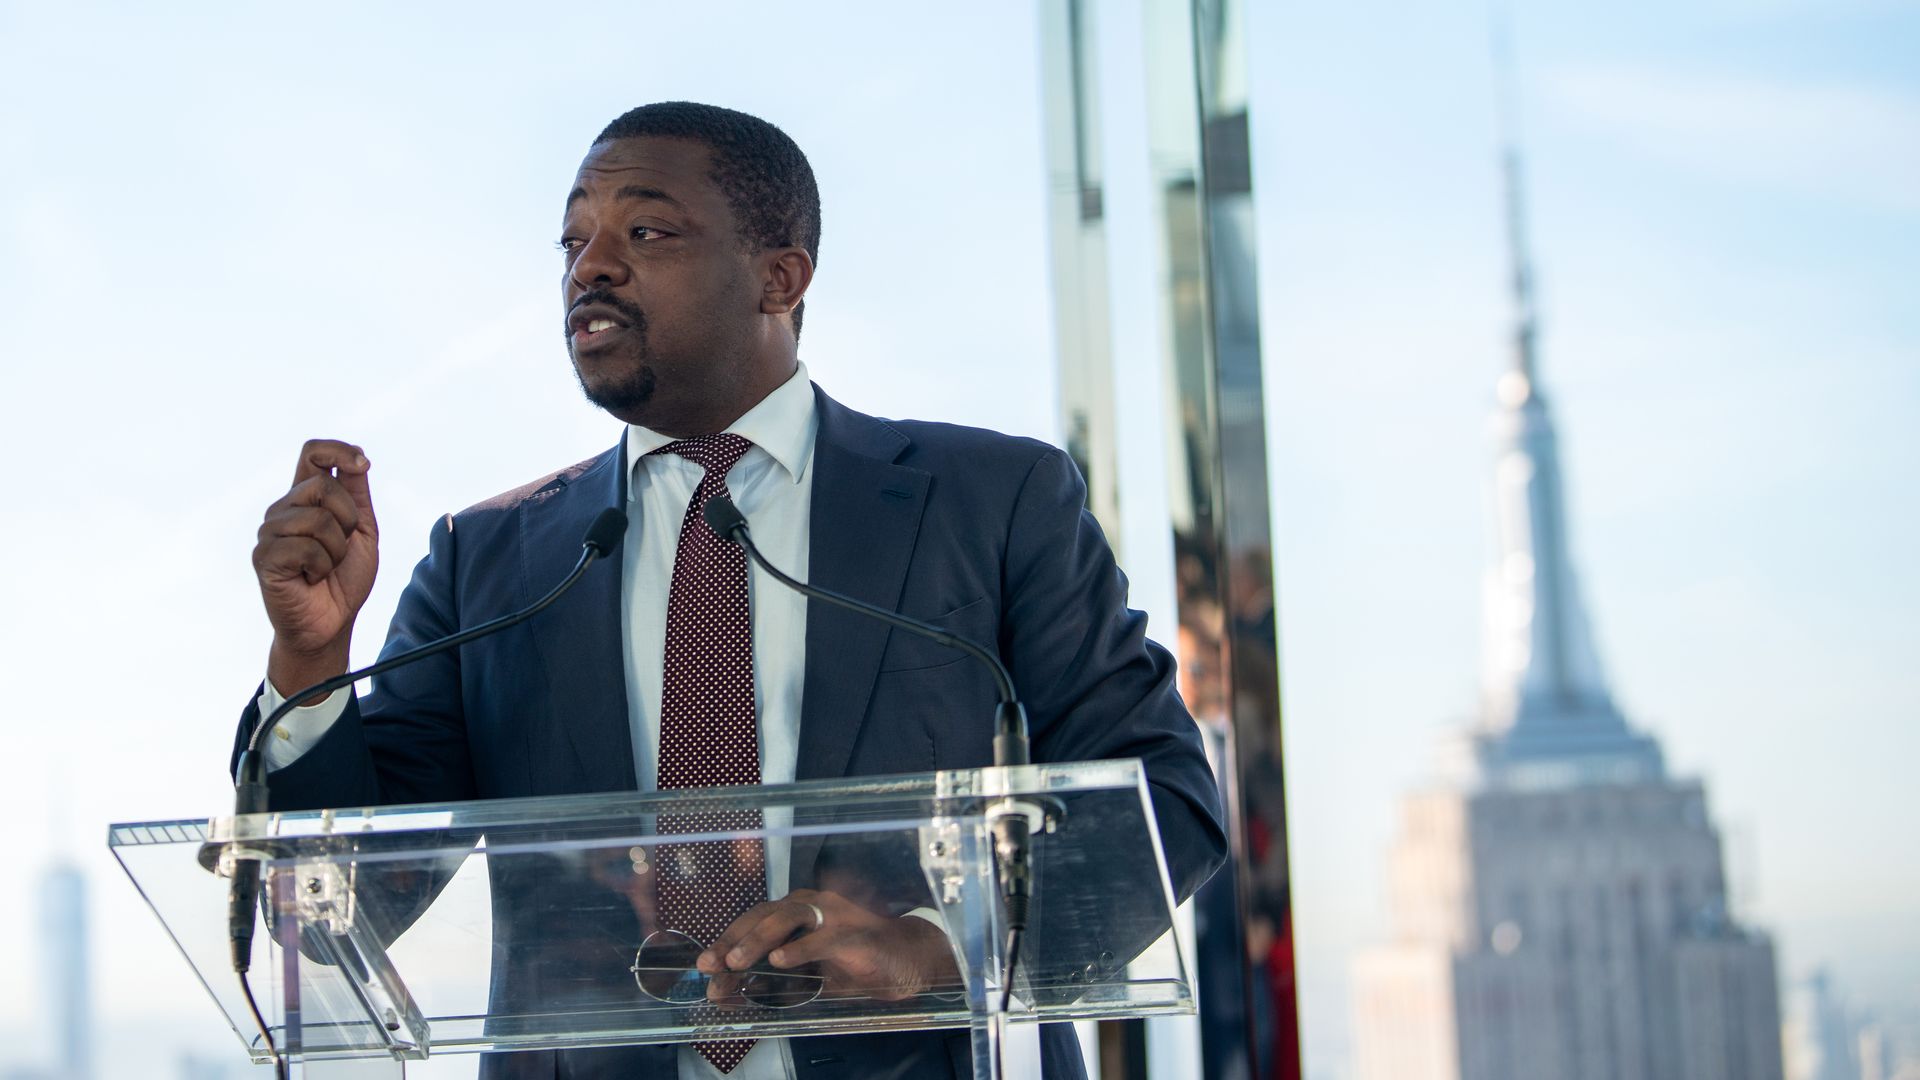 New York Lt. Governor Brian Benjamin speaks at the opening ceremony and ribbon cutting for Summit One Vanderbilt on October 21, 2021 in New York City